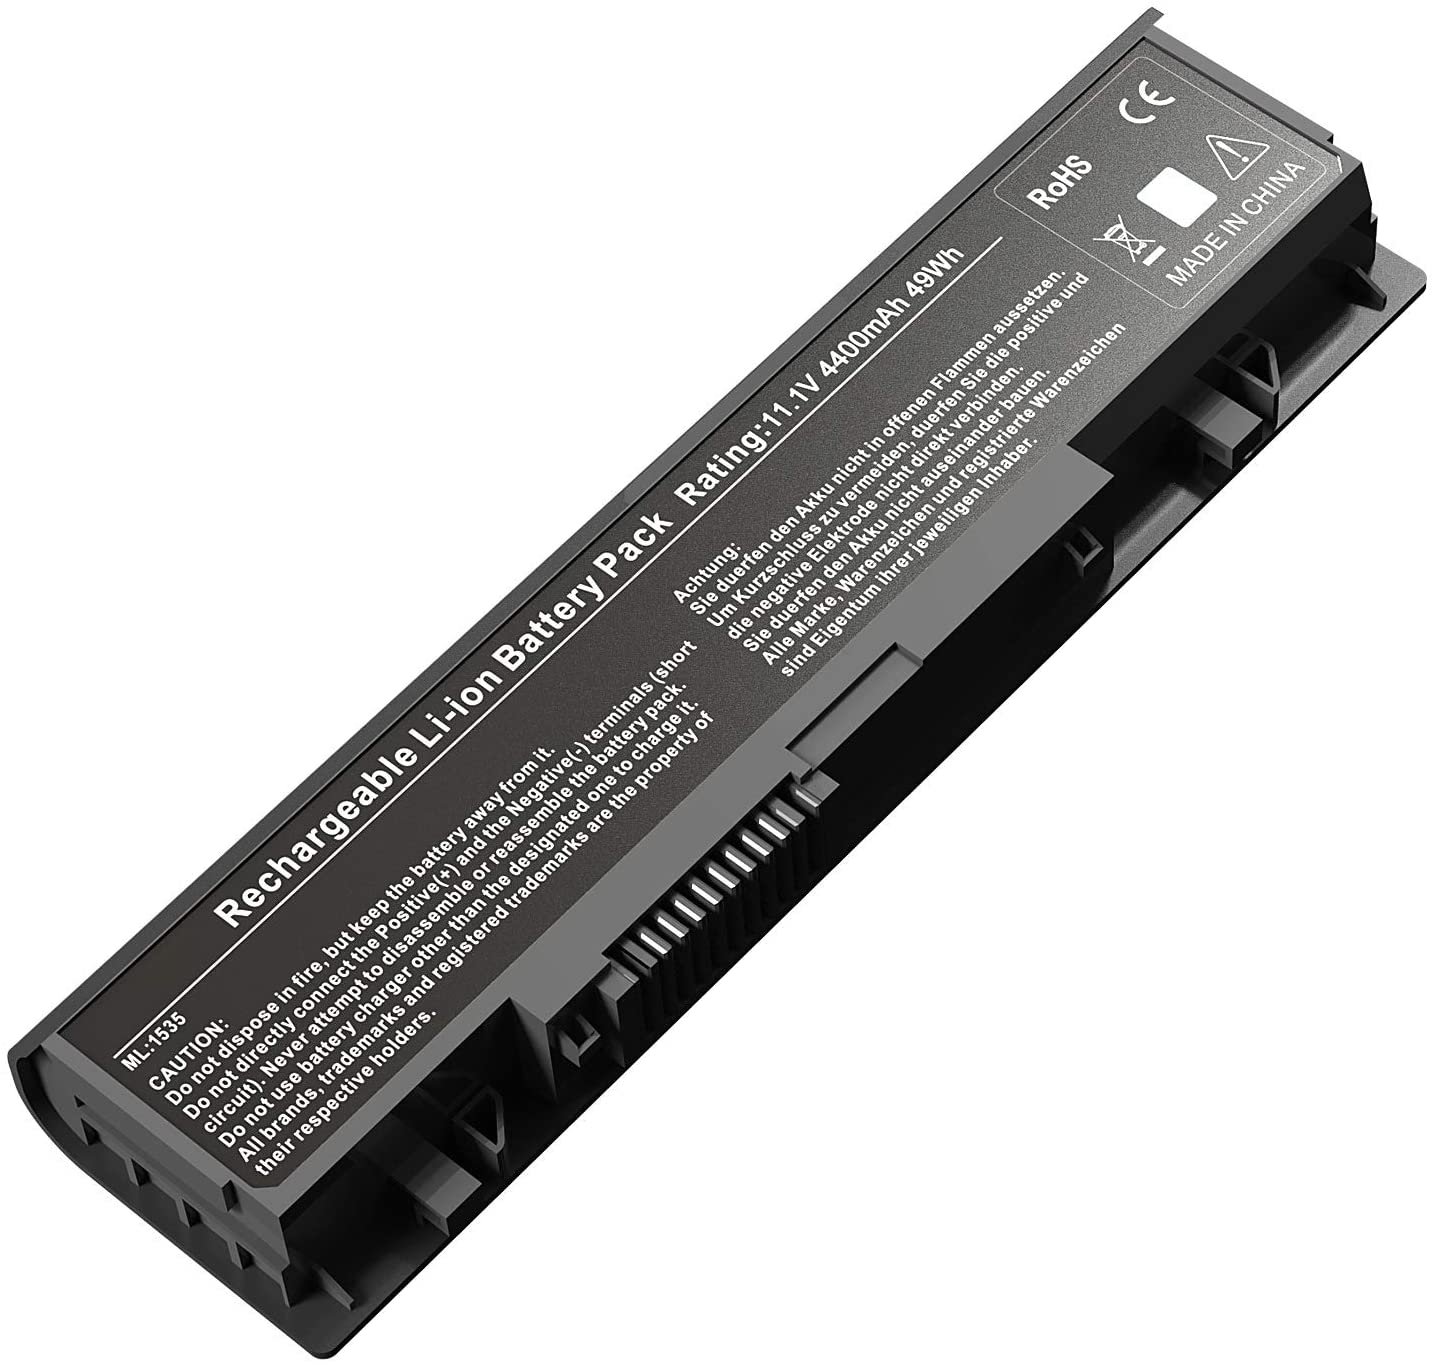 Battery For Dell 1535,1535,1536,1537,1555,1558, PP33L,PP39L (WU960, WU965)